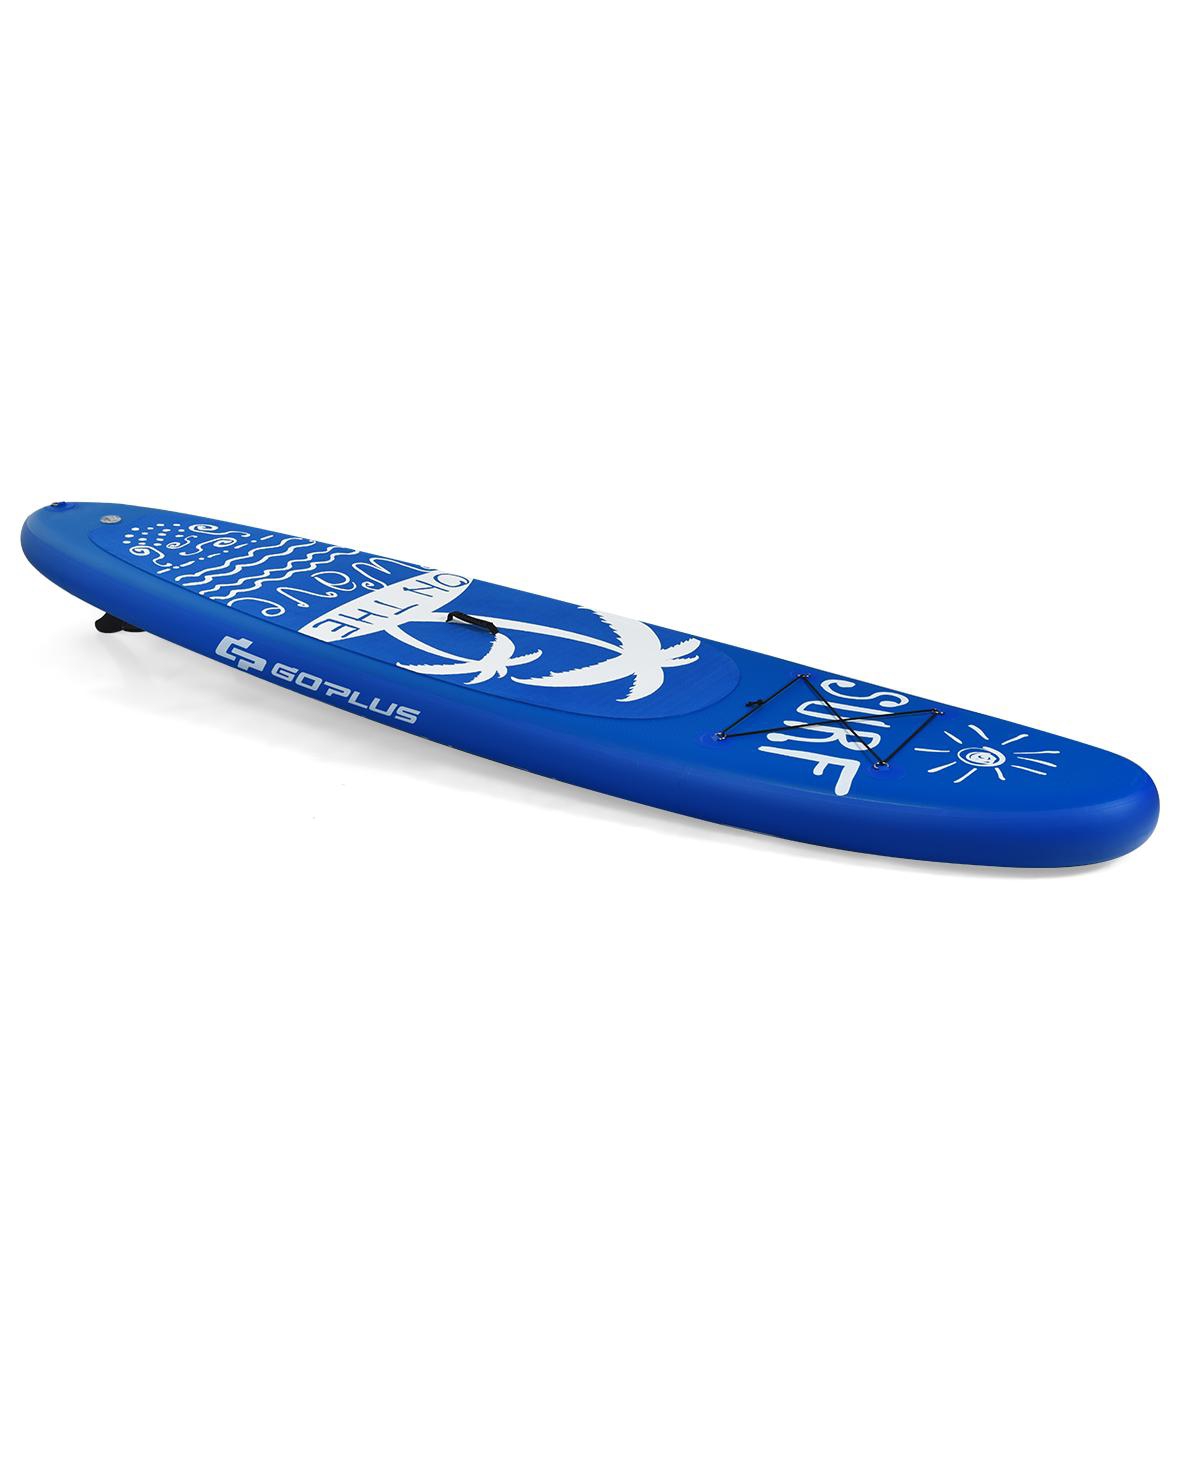 Inflatable Stand Up Paddle Board Surfboard - Navy